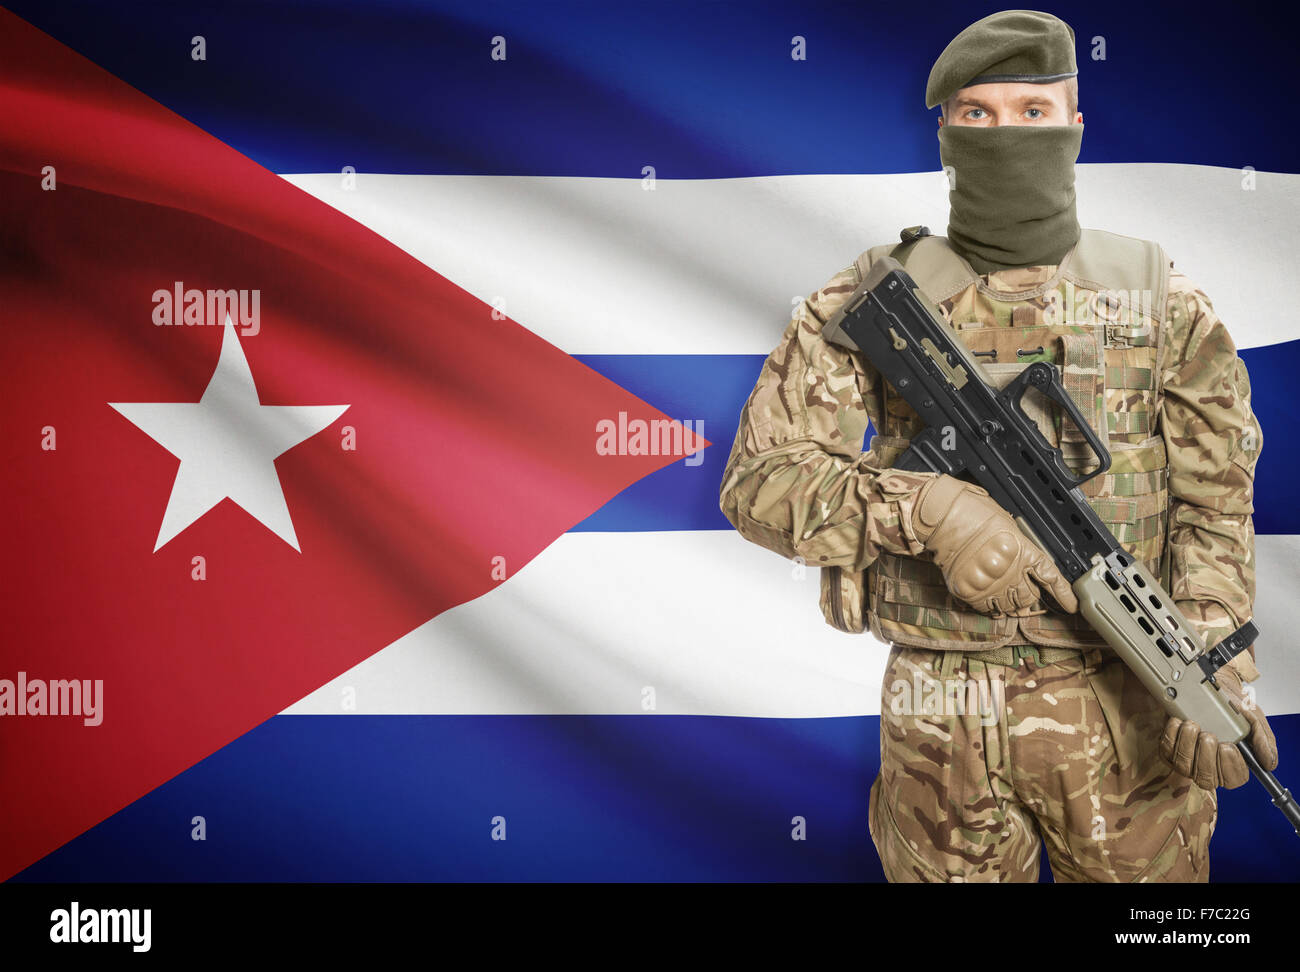 Soldier holding machine gun with national flag on background - Cuba Stock Photo